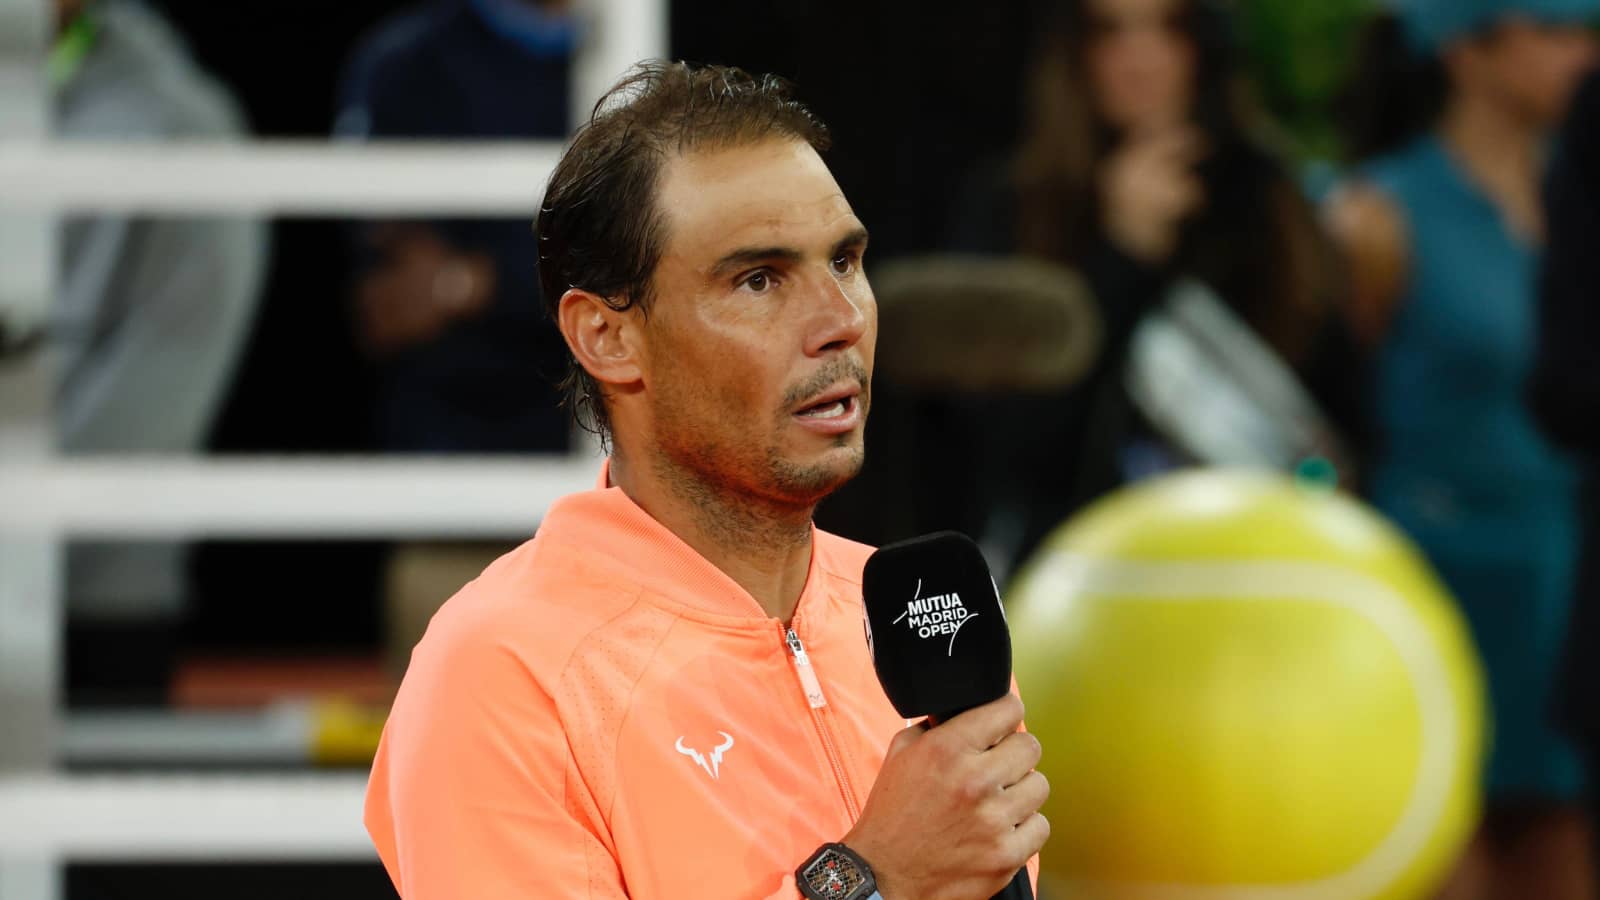 rafael nadal discovers who he will face at the italian open